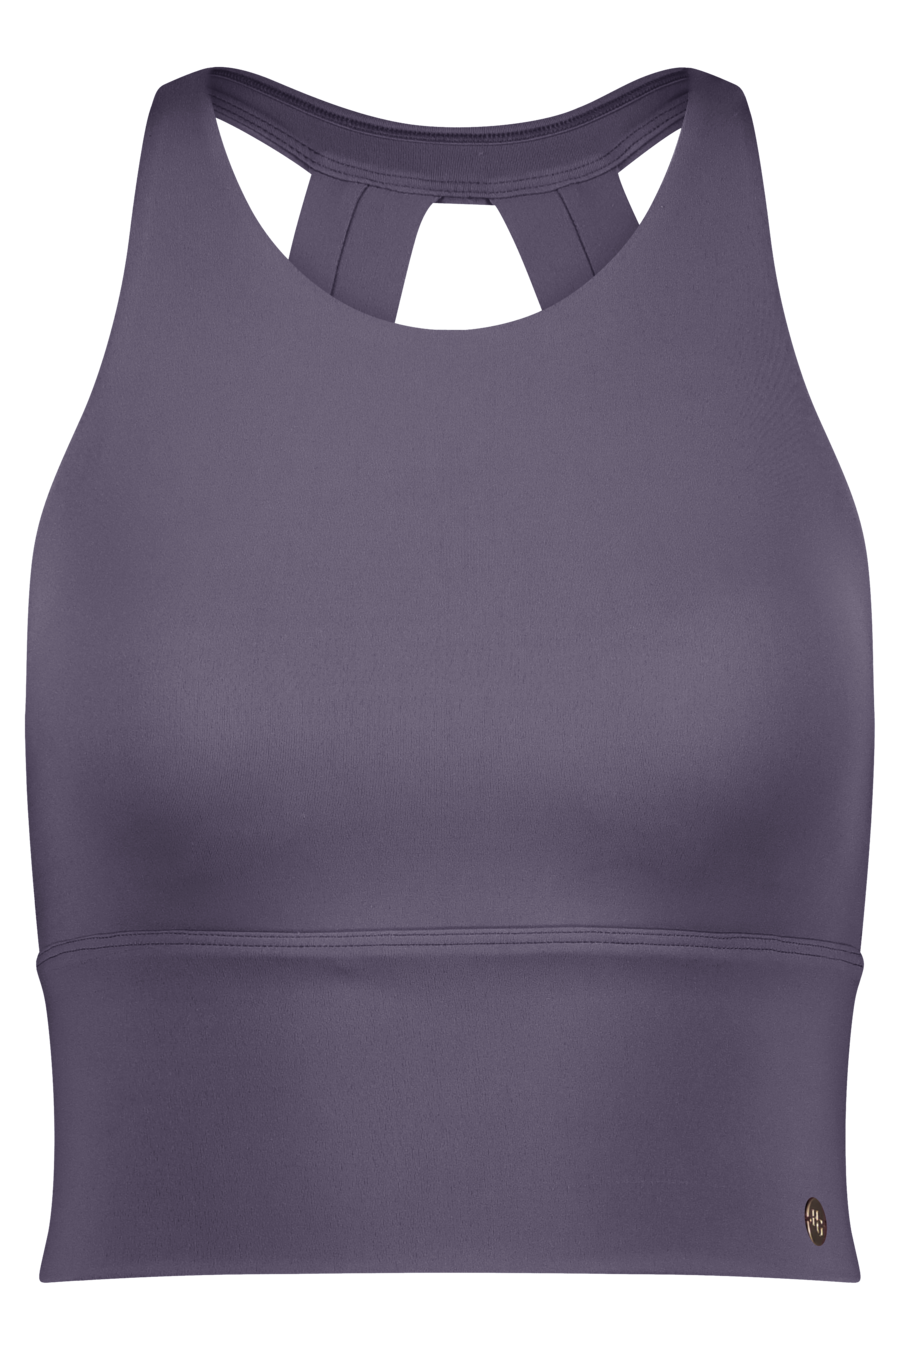 House of  Gravity Silhouette Crop Top - Lavender Mist-8